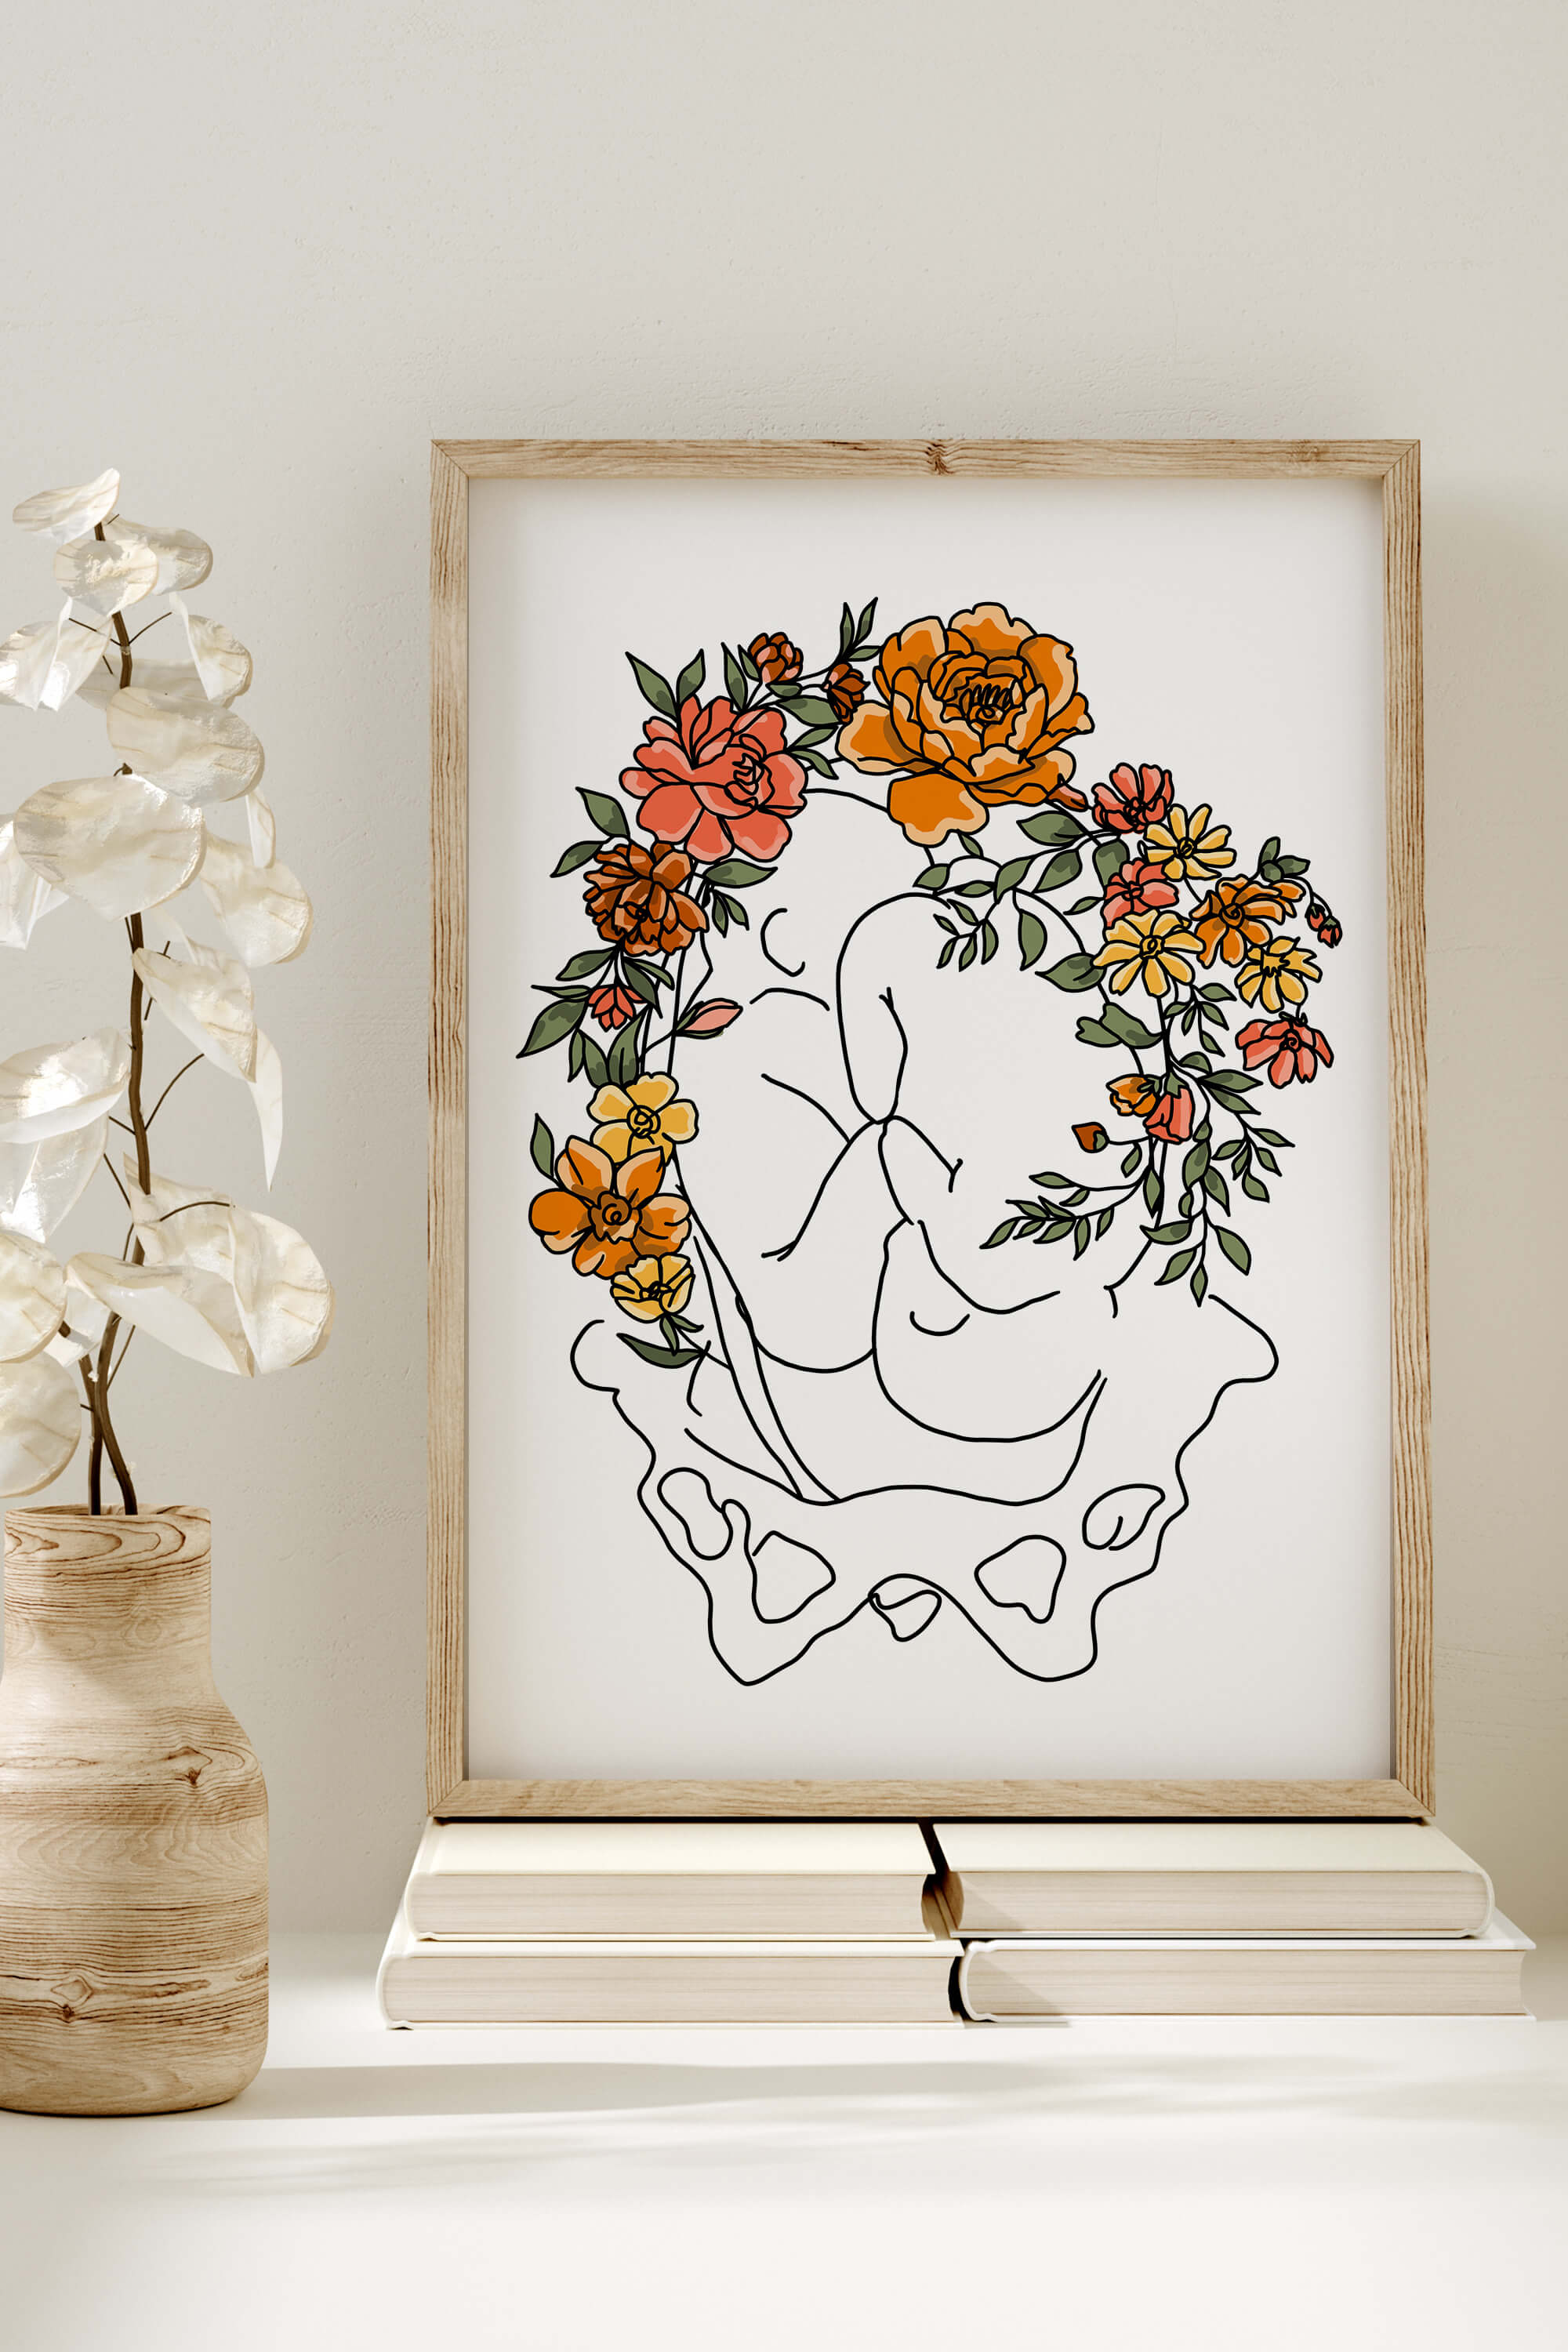 A thoughtful gift for midwives, this art print showcases a delicate floral uterus design. The intricate details and harmonious blend of nature and anatomy make it a perfect expression of gratitude and celebration.